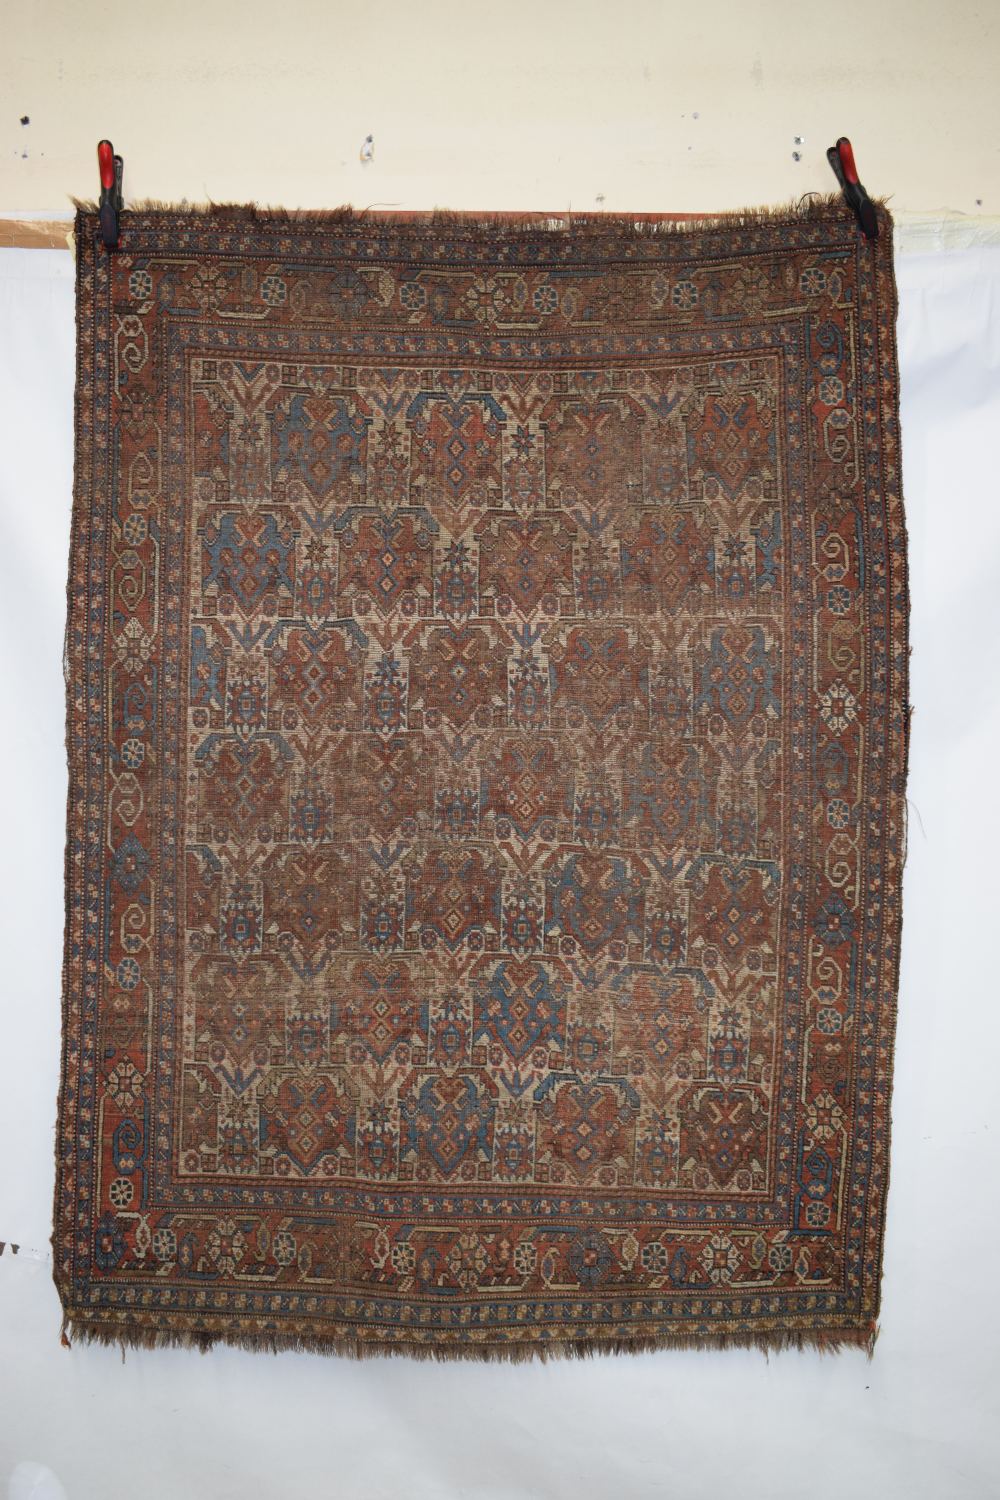 Afshar rug with ivory field, Kerman area, south east Persia, circa 1920s-30s, 6ft. 2in. x 4ft.